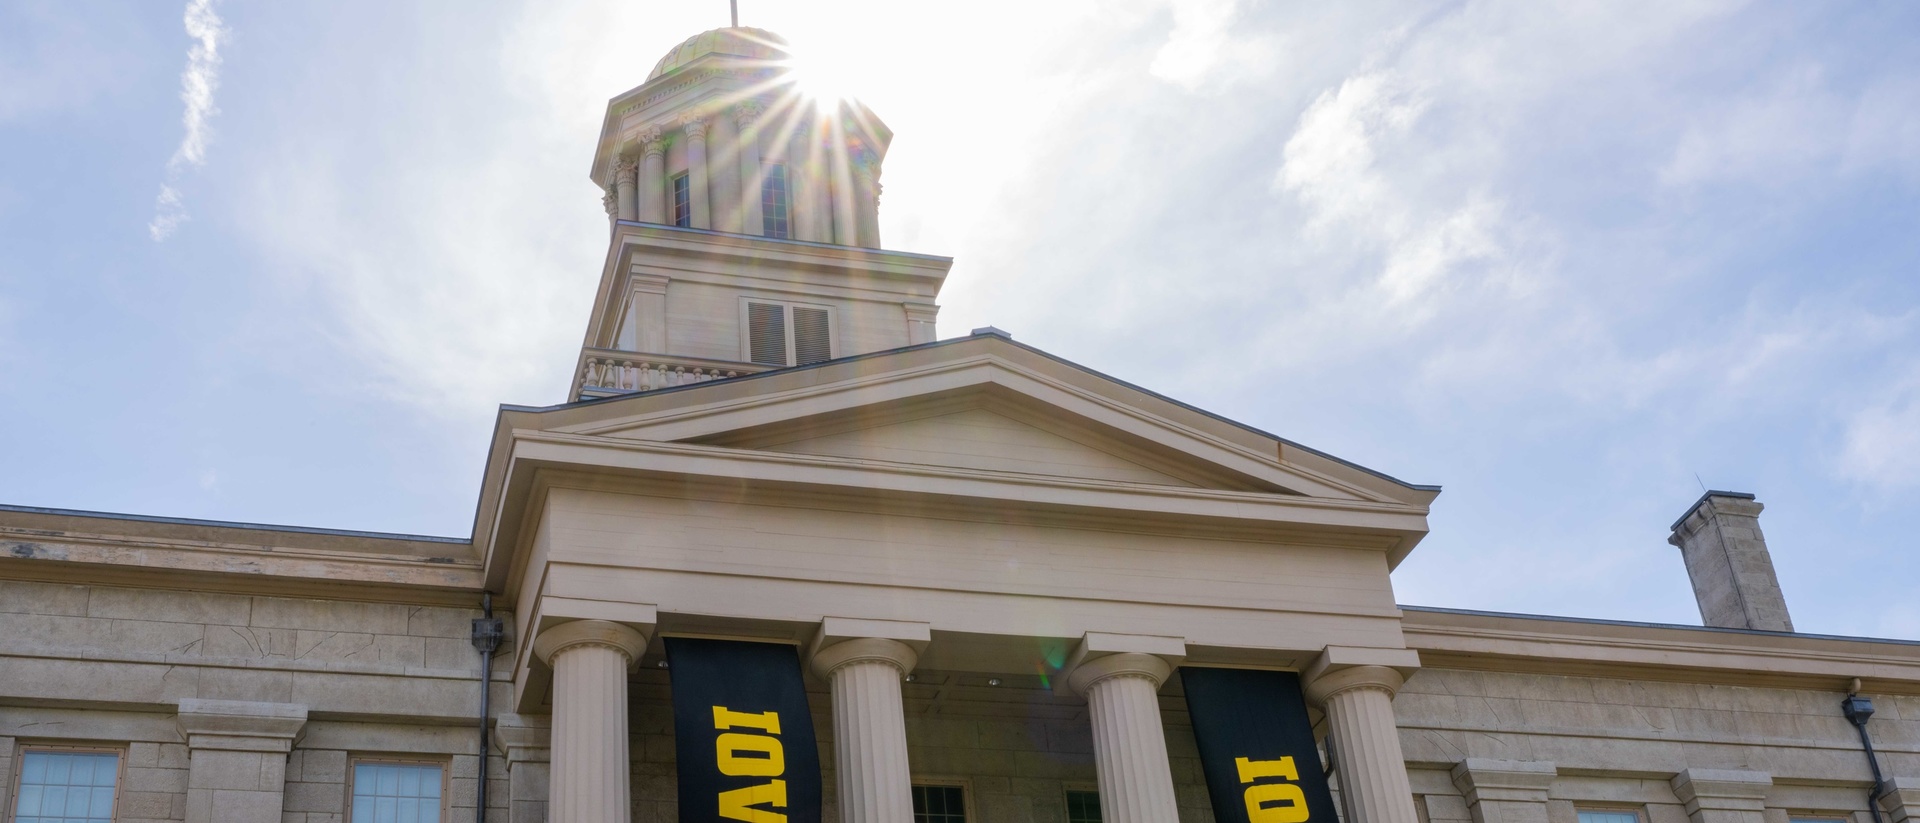 UI Engineering students named to fall 2022 president's list, dean's